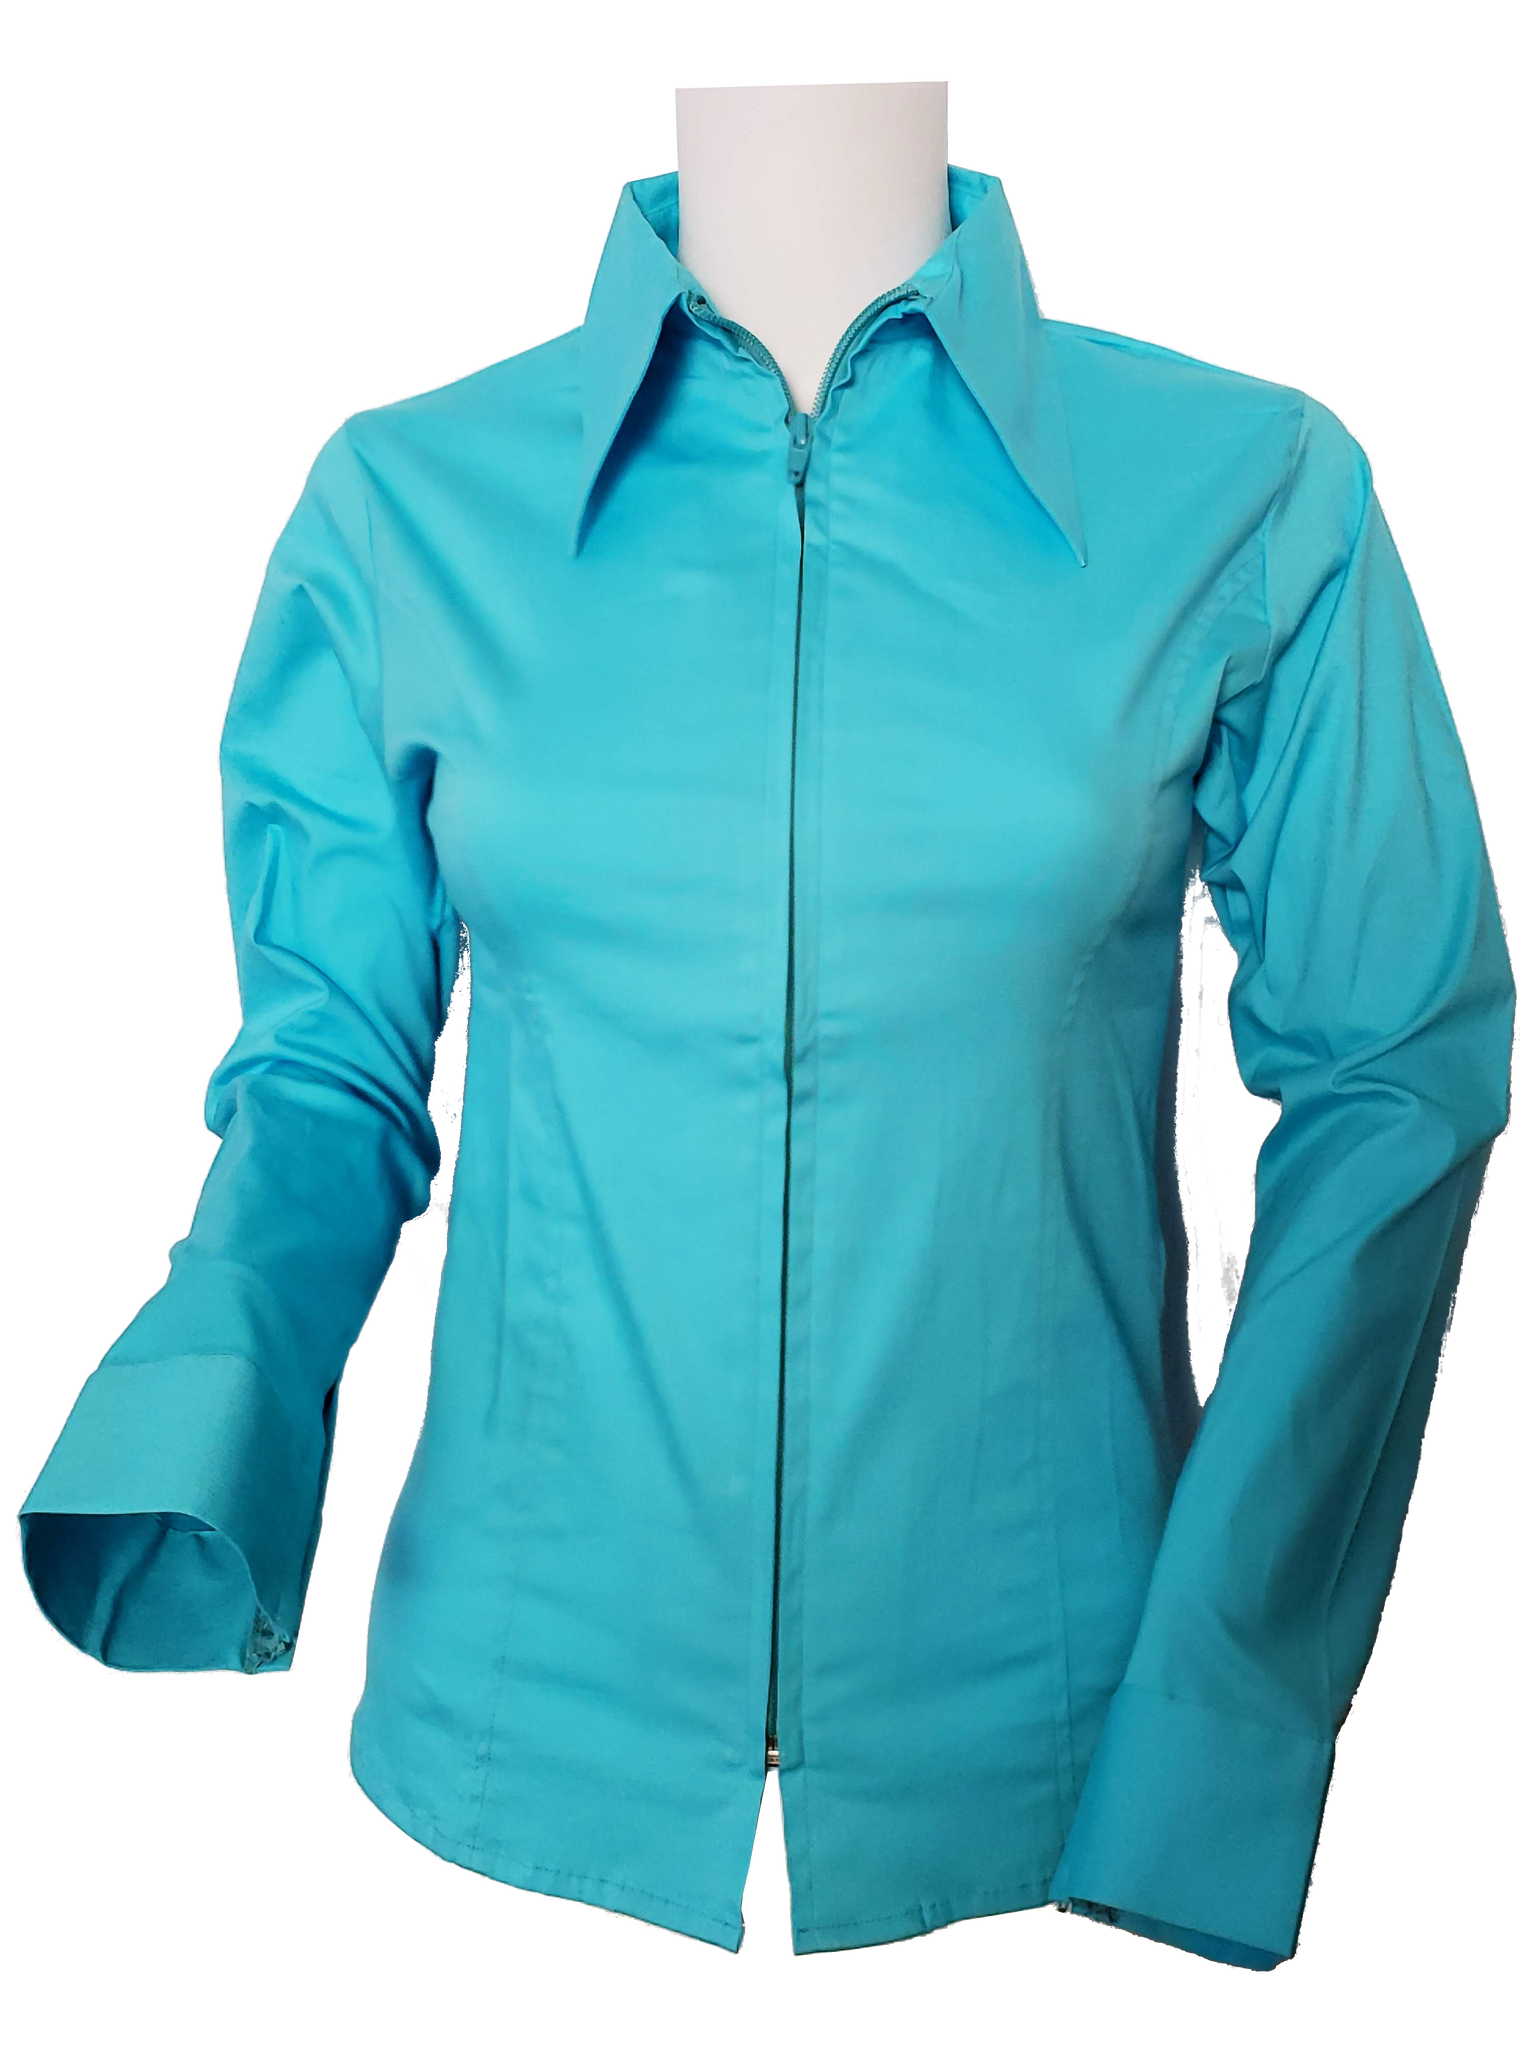 Ladies Solid Color Zip Up Show Shirt (Turquoise)